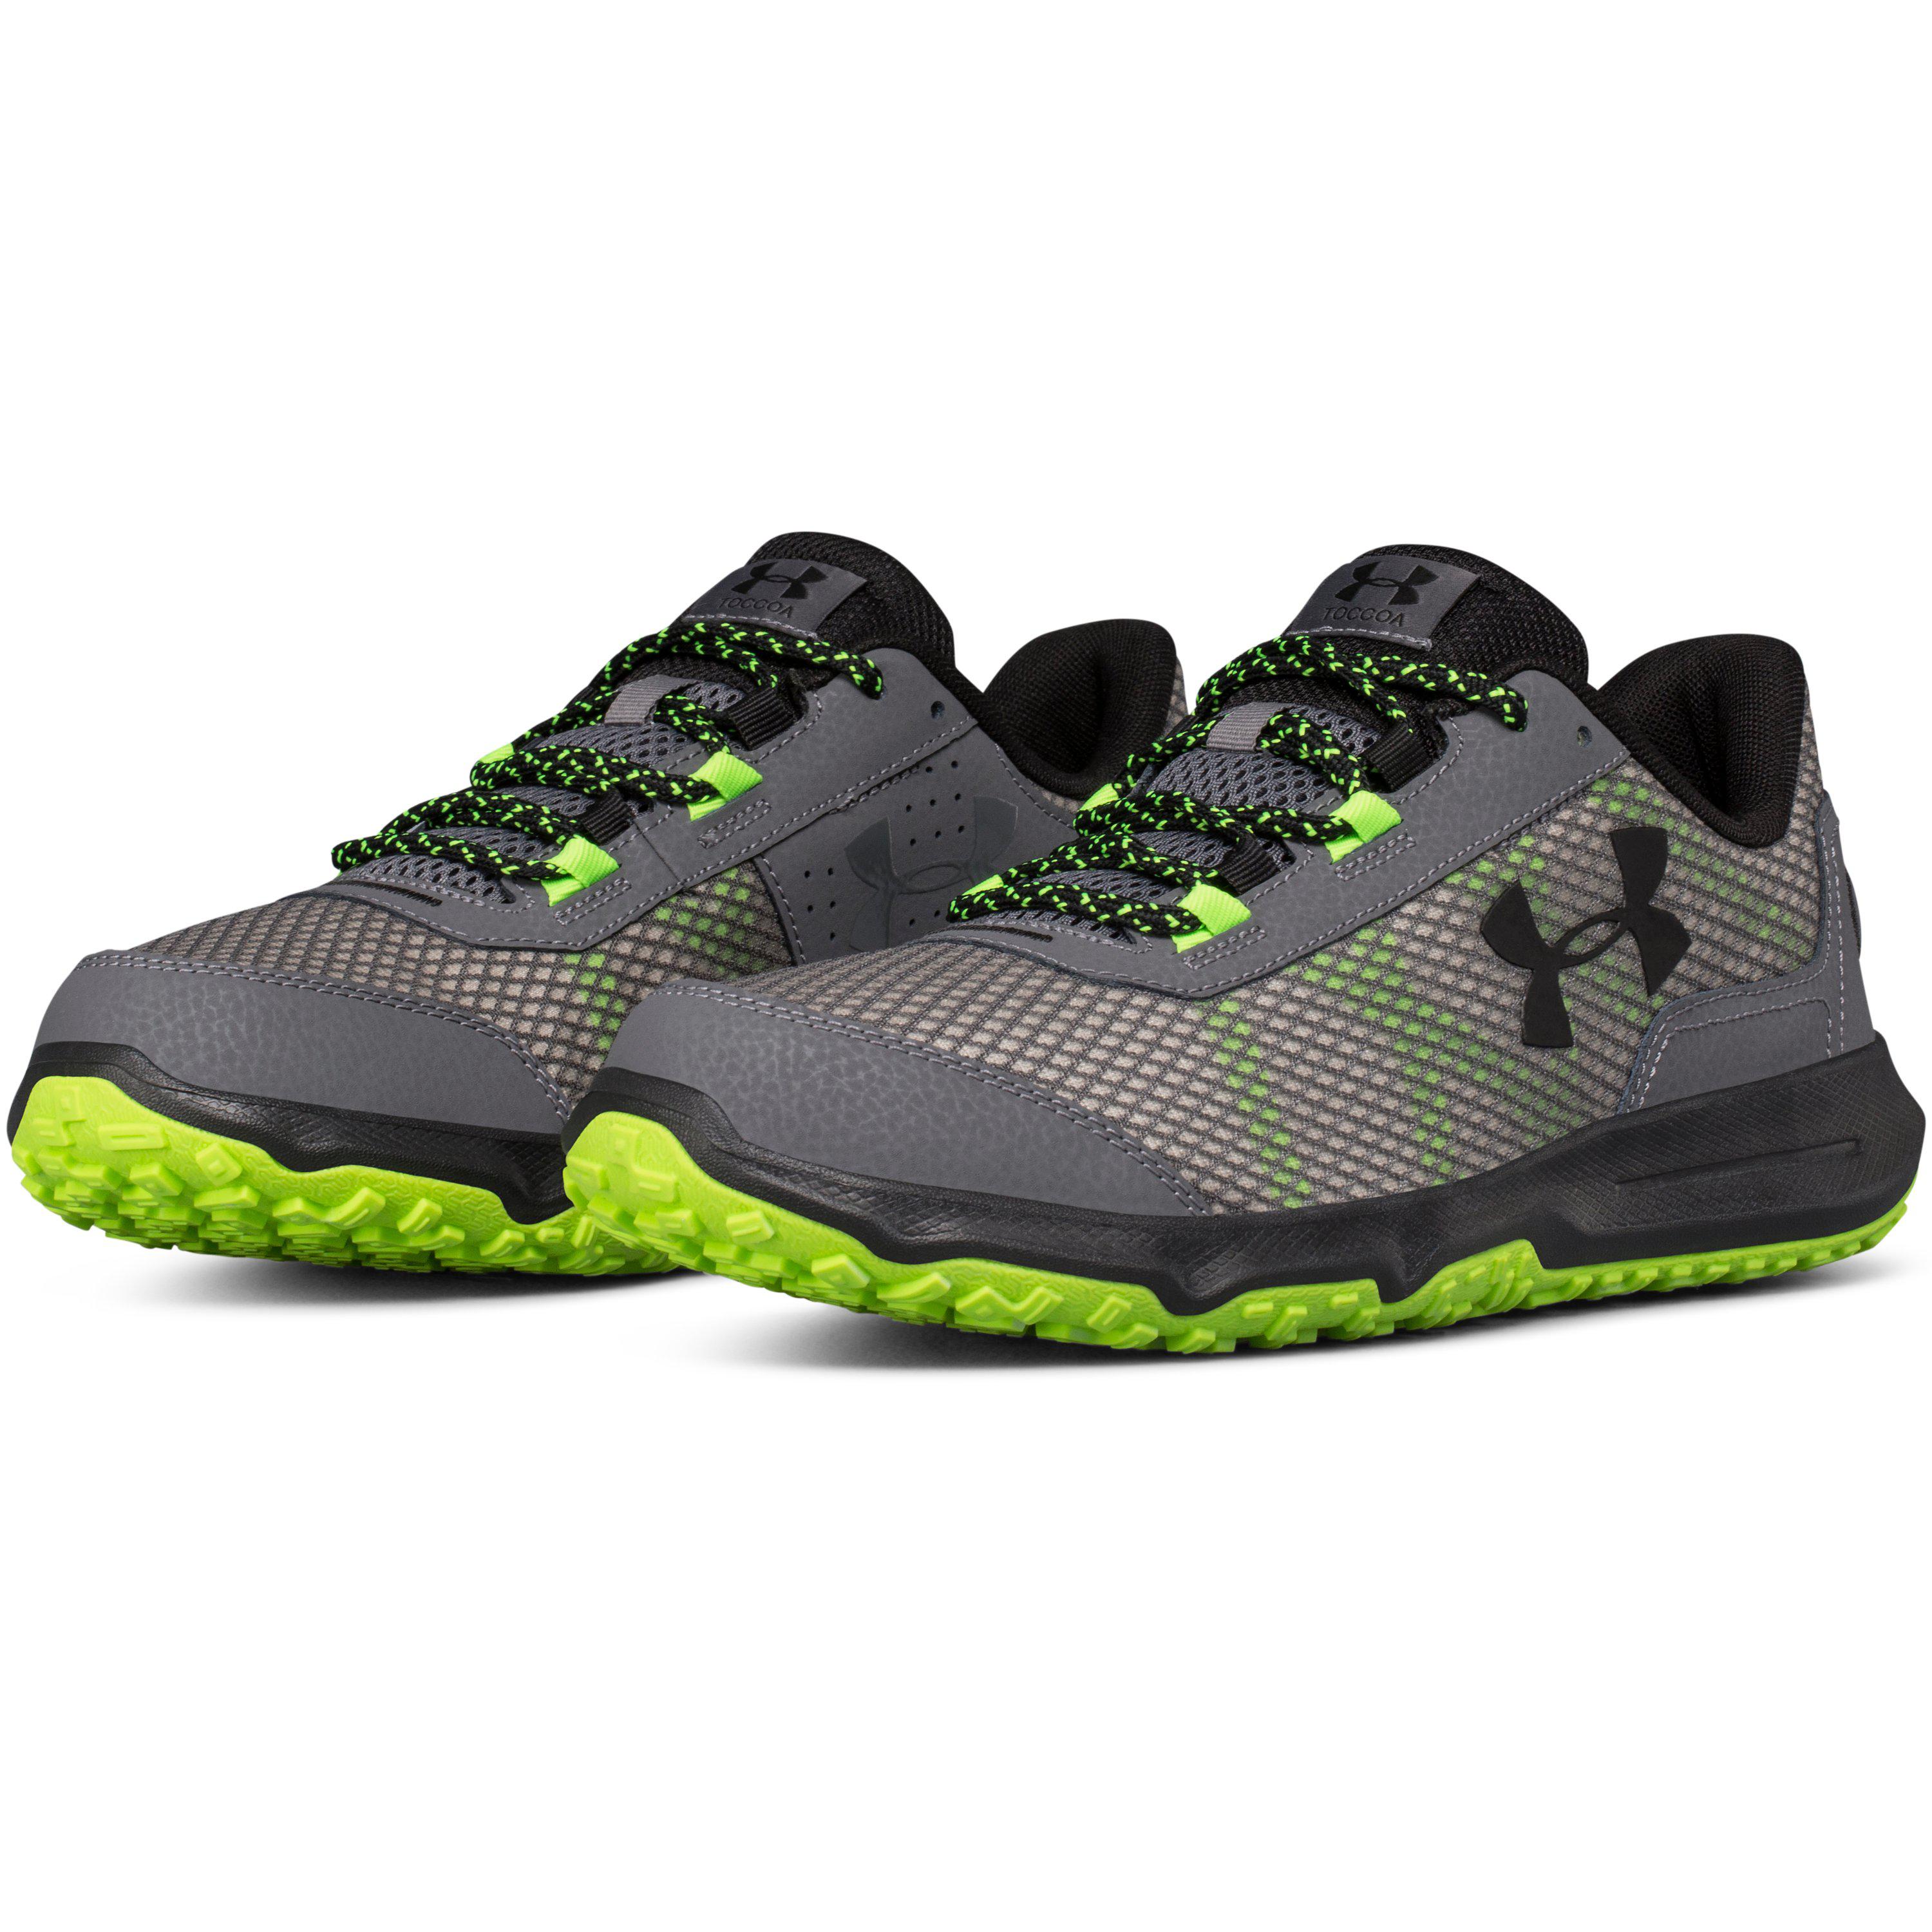 Under Armour Leather Men's Ua Toccoa Running Shoes in Green for Men - Lyst